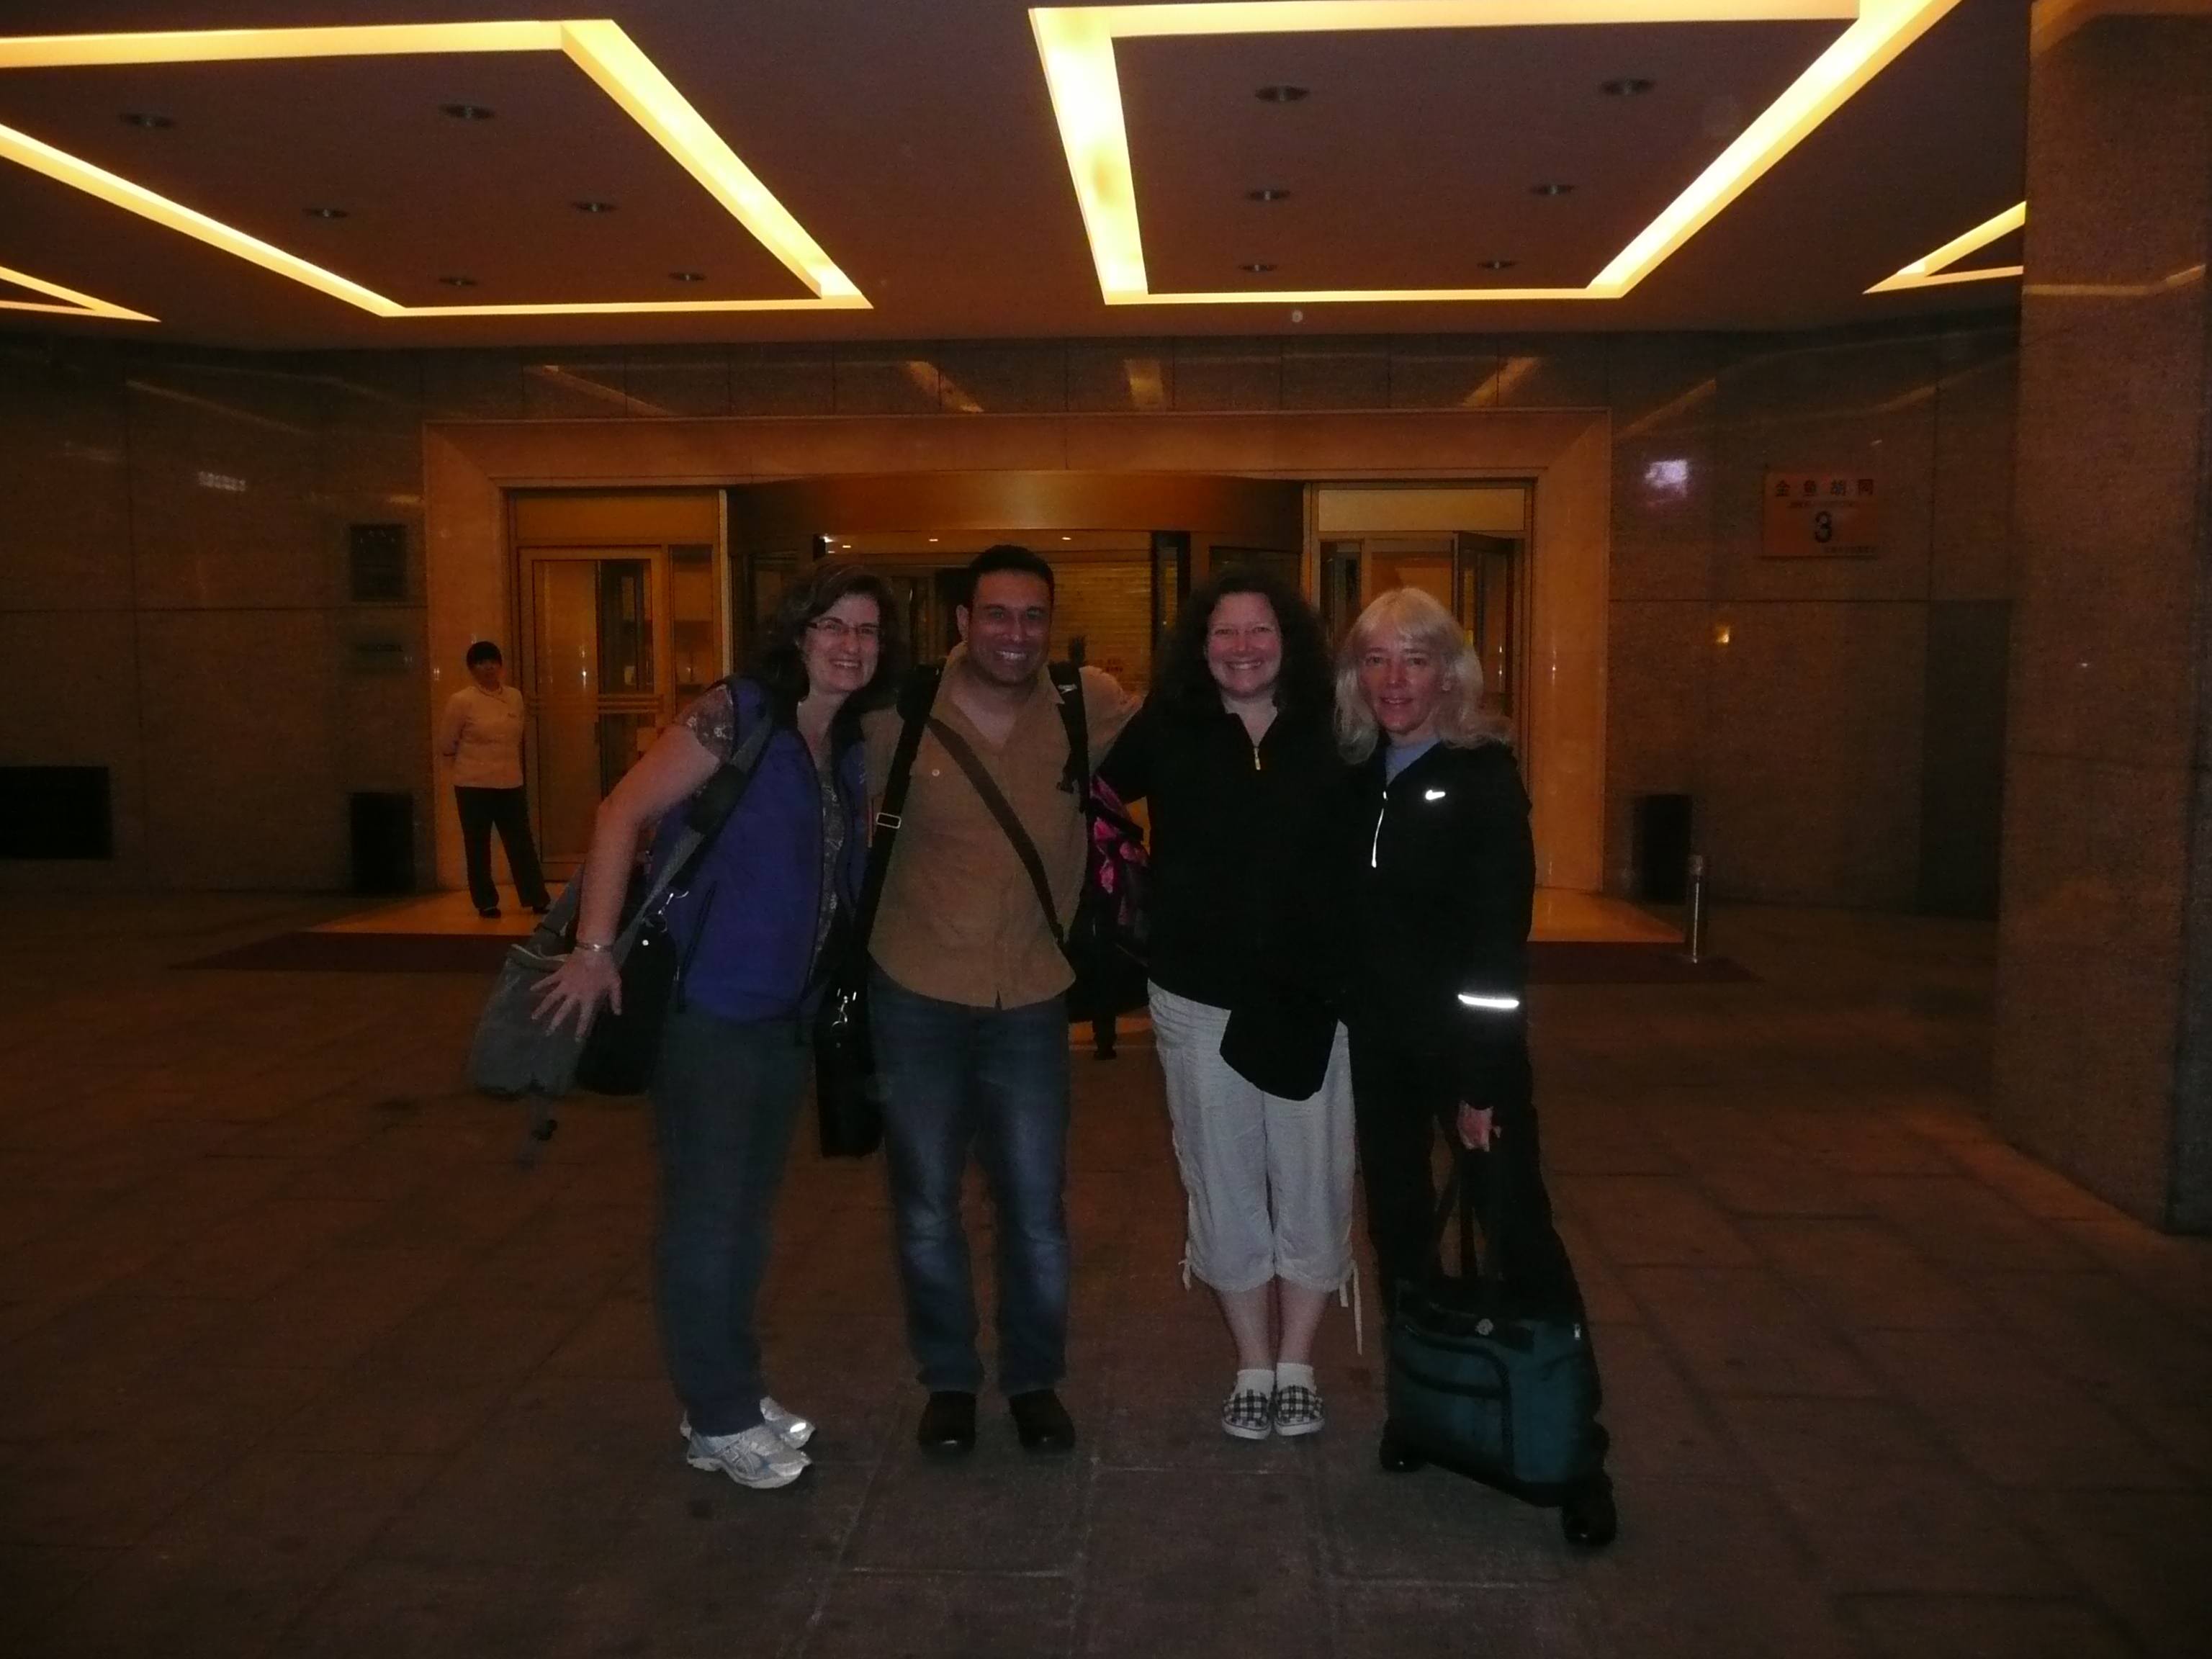 (from left): Anne Porteous, Kevin Paes, Paula Thulin, and Kimberley Nemrava.